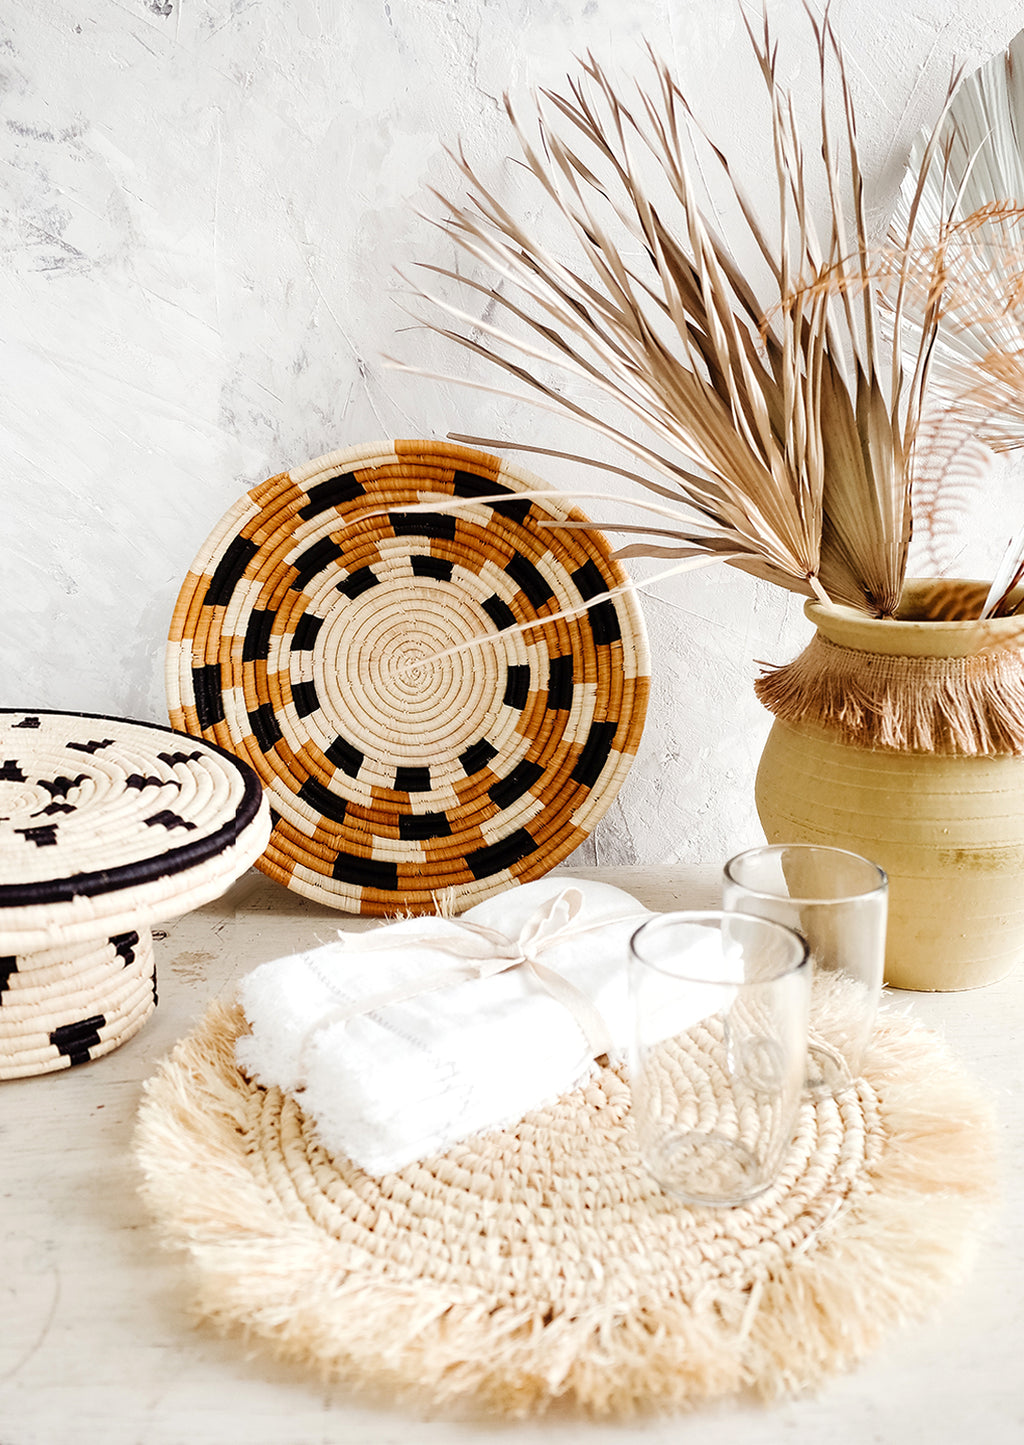 2: Variety of tabletop decor in neutral hues arranged on a tabletop